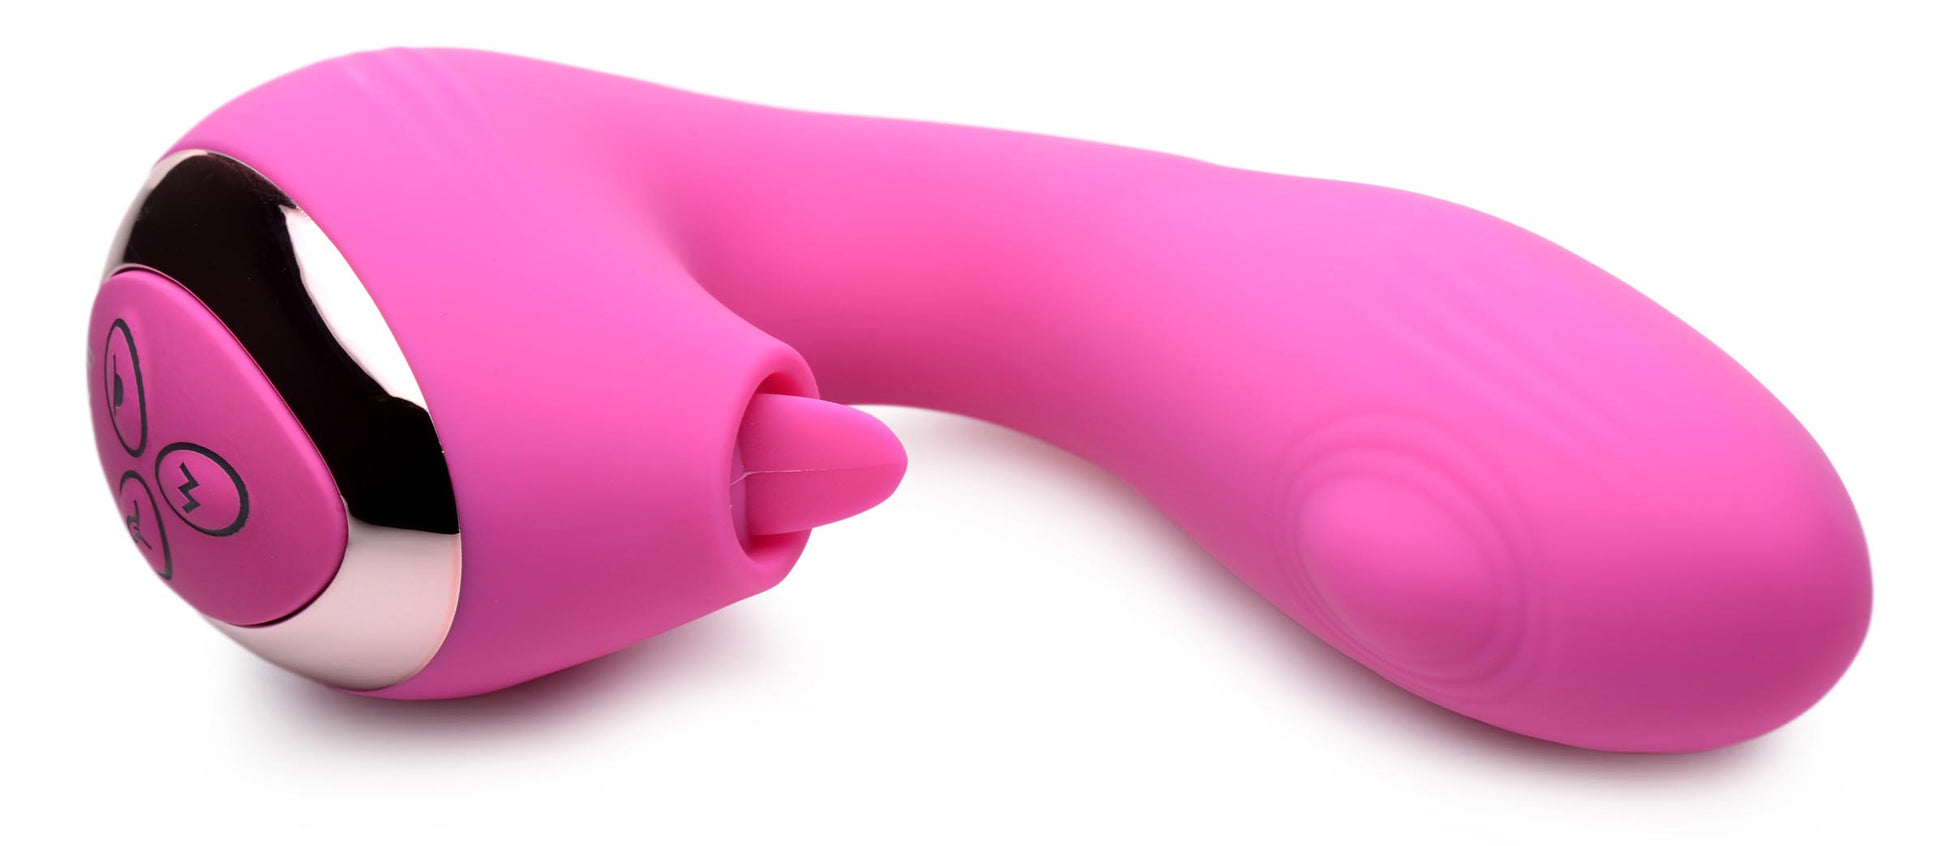 10X Licking G-Throb Rechargeable Silicone Vibrator - UABDSM